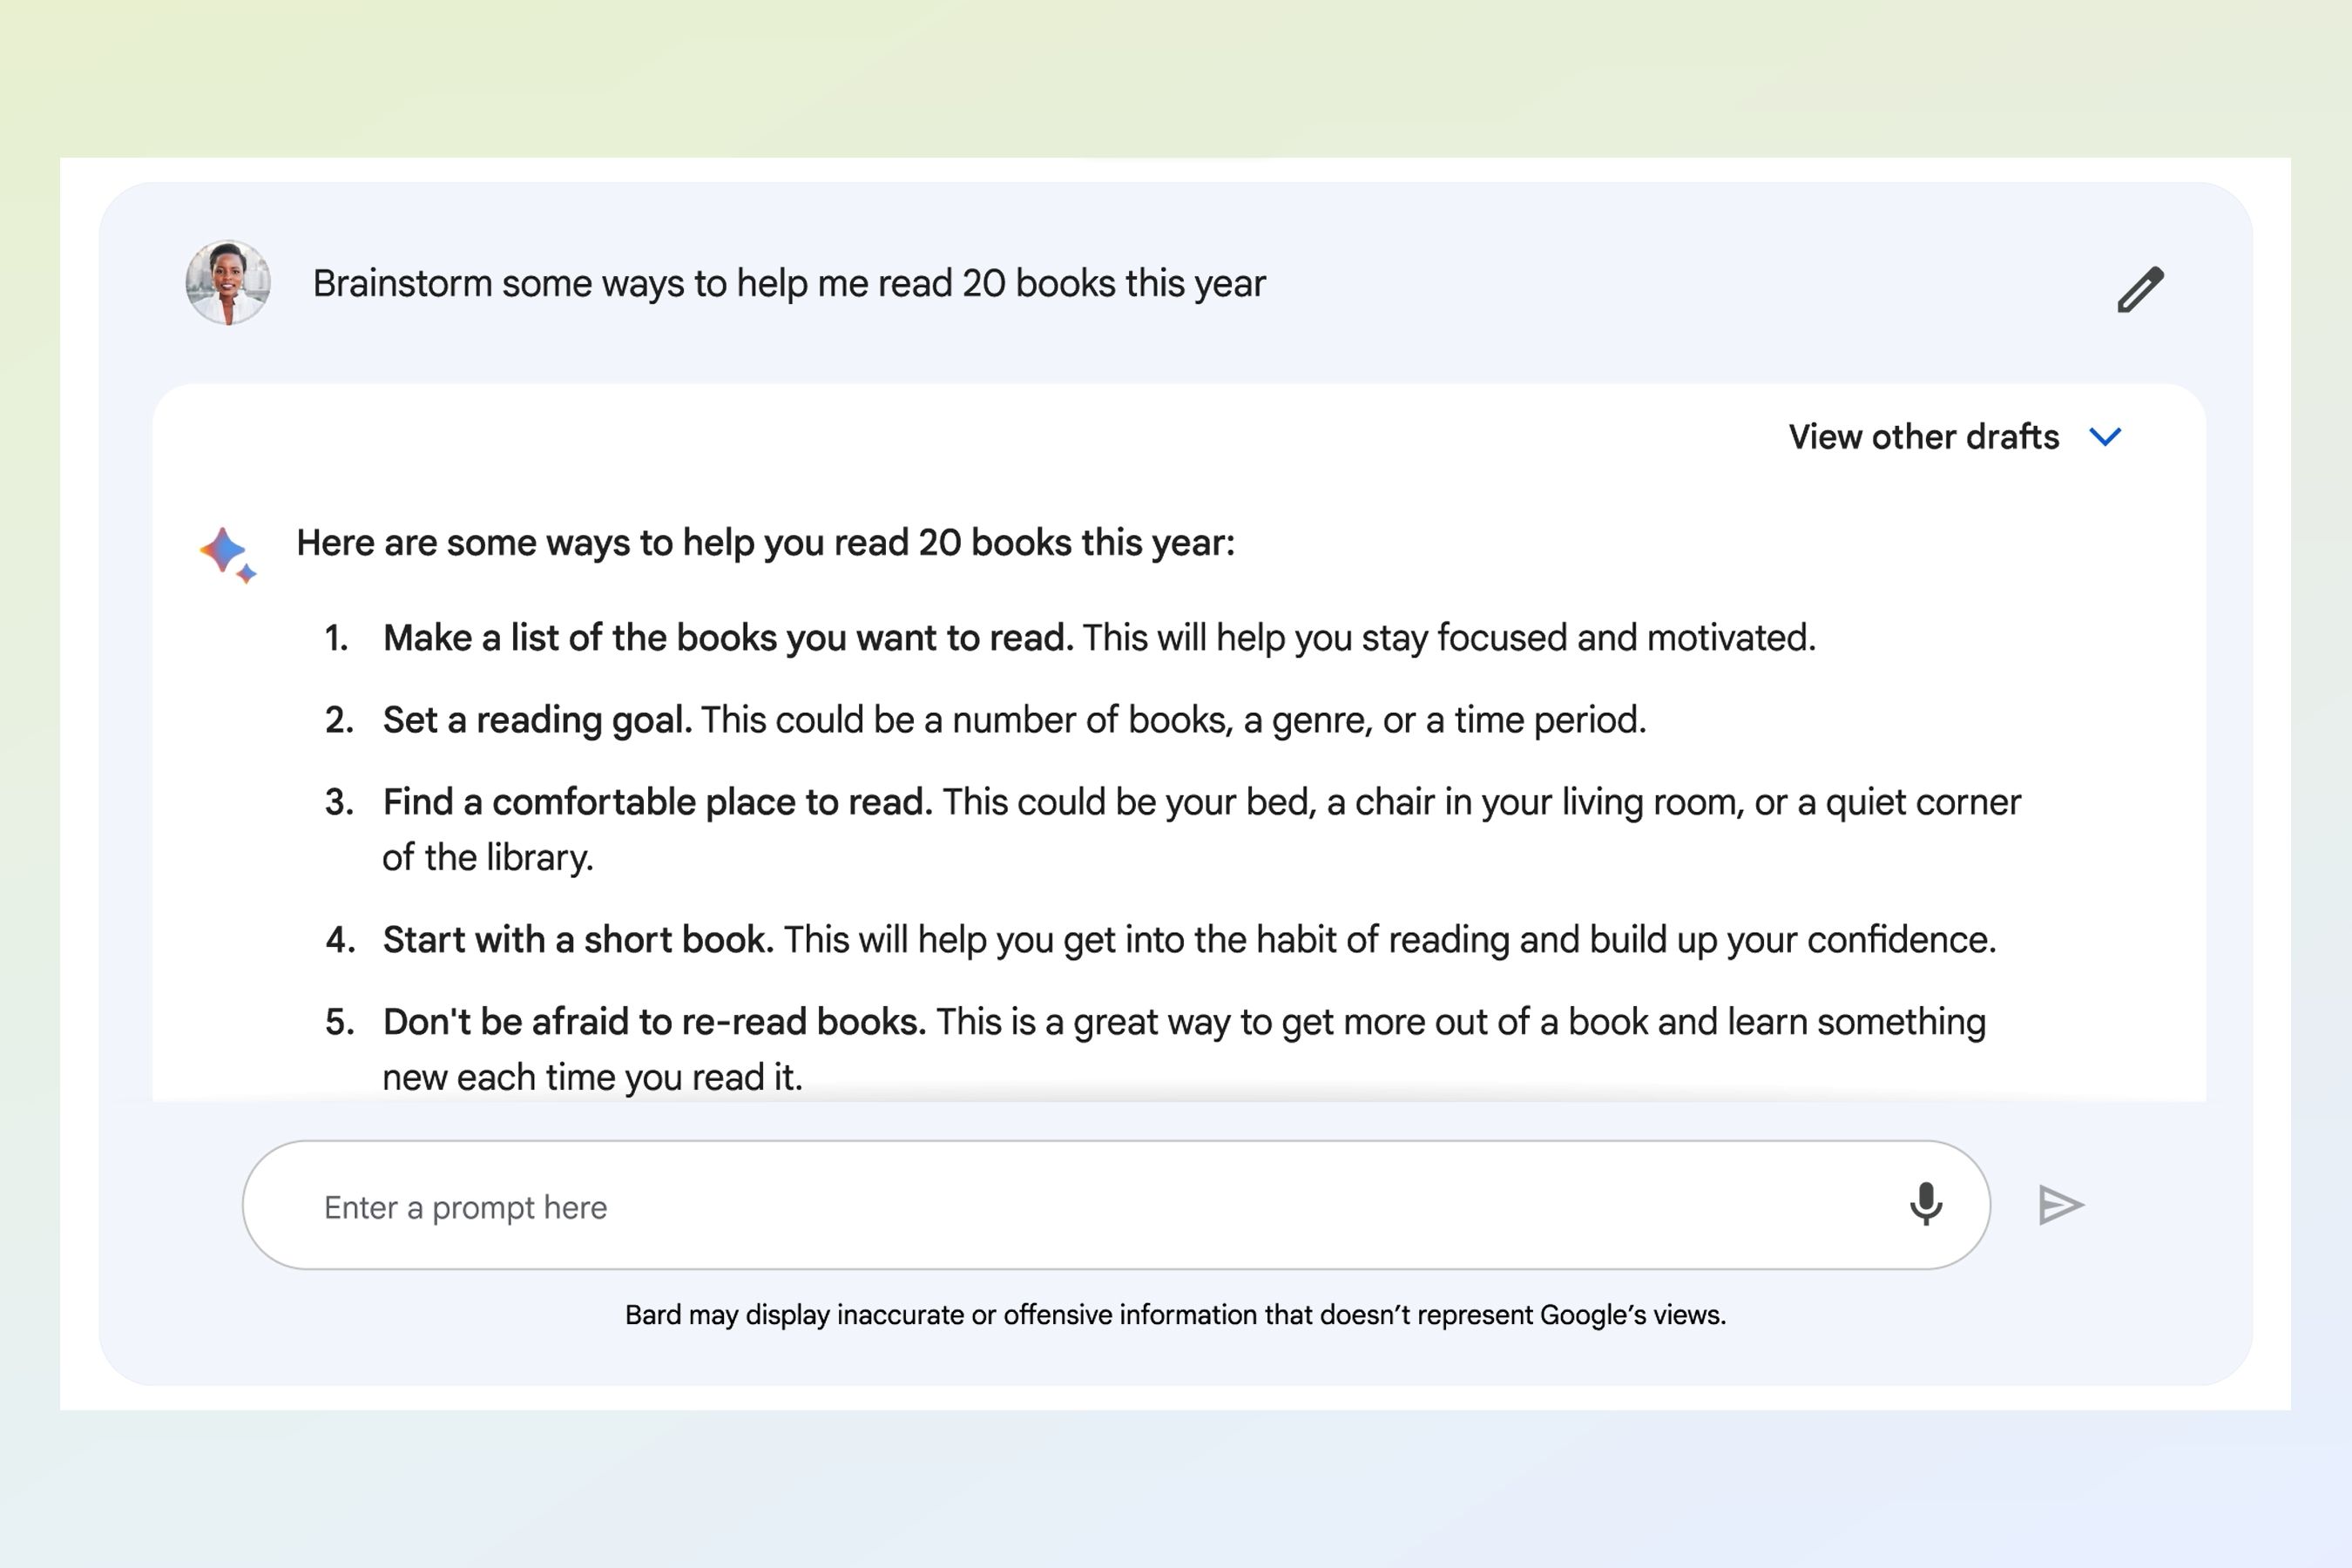 Screenshot of Bard giving a user tips on how to read 20 books in a year